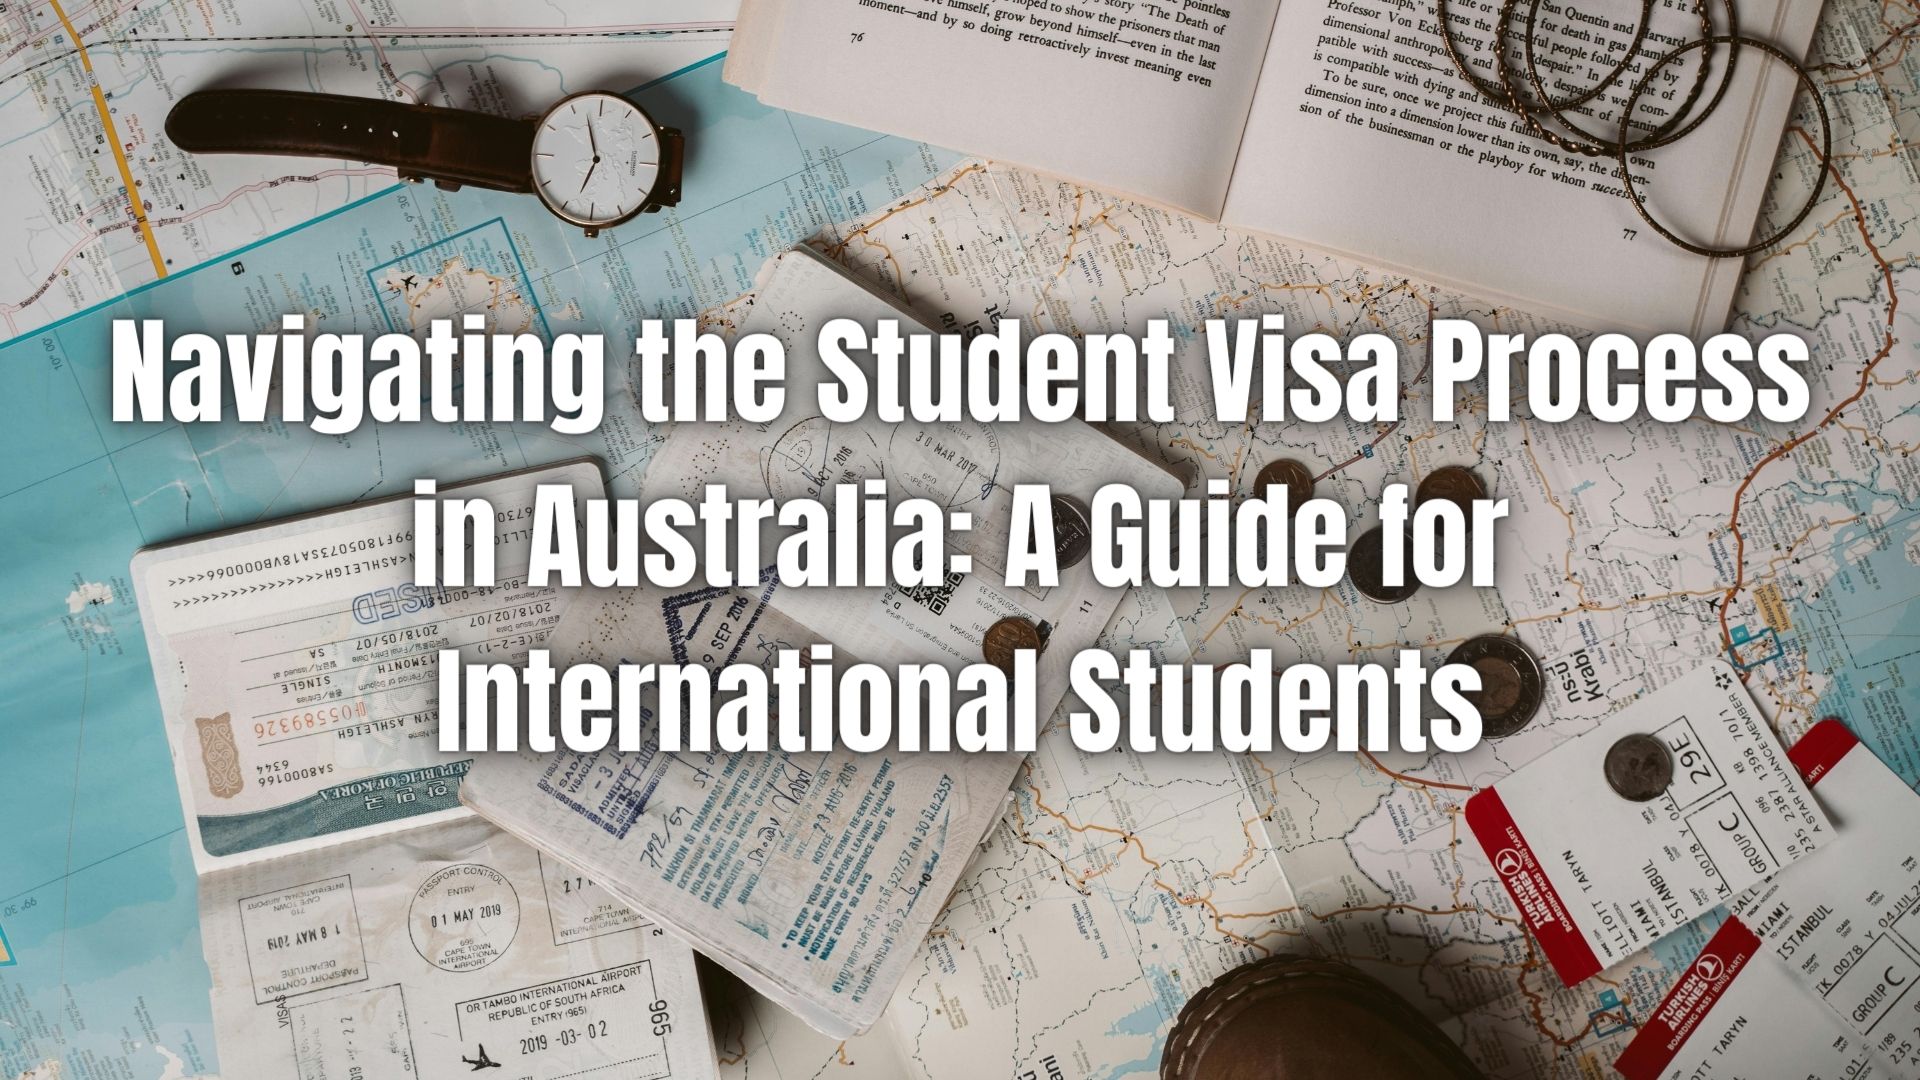 Unlock the secrets of studying Down Under! Our guide to the Student Visa Process in Australia helps international students navigate smoothly.